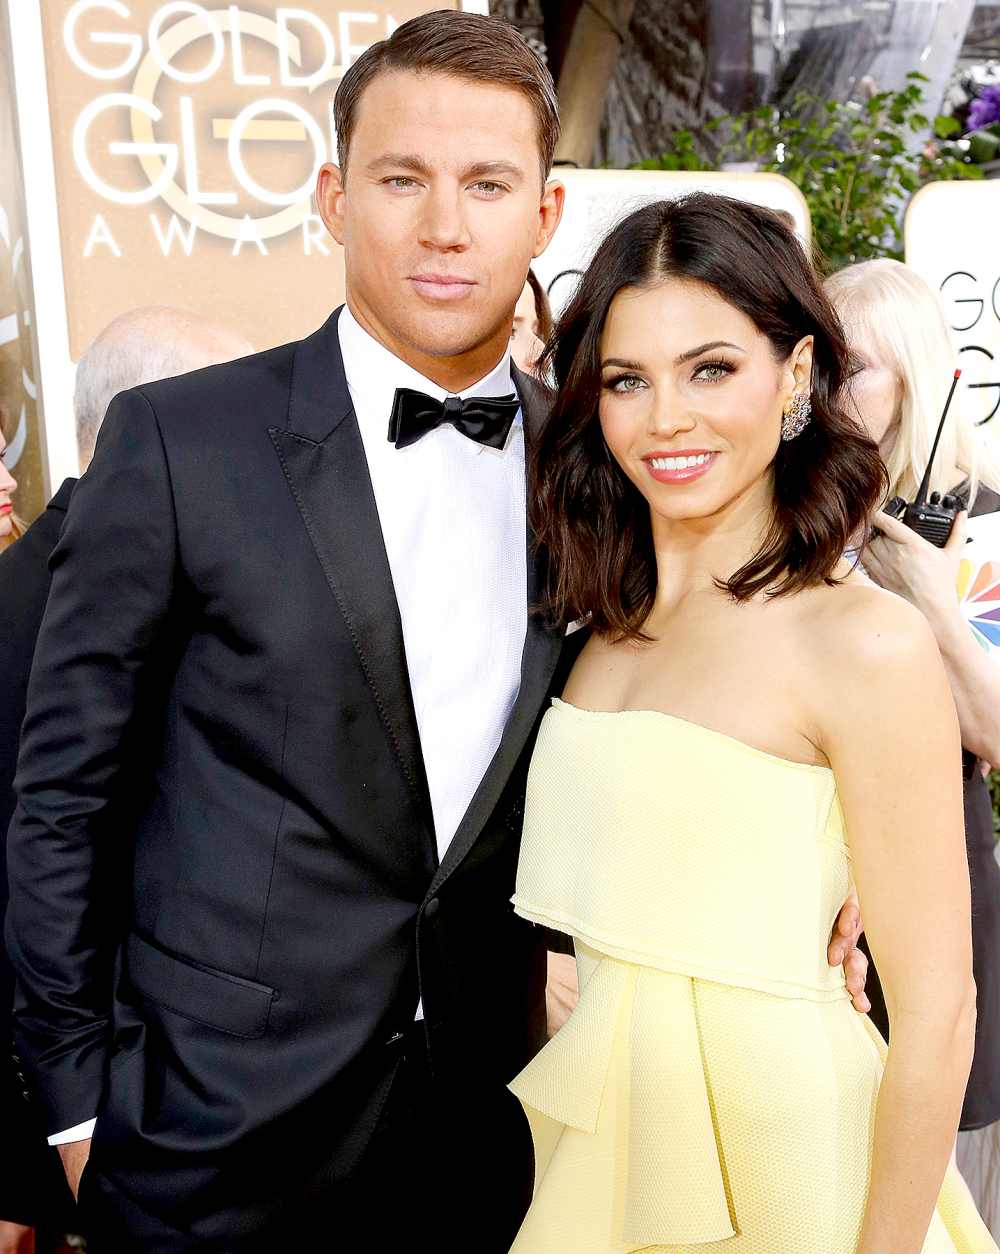 Channing Tatum and Jenna Dewan arrive to the 72nd Annual Golden Globe Awards held at the Beverly Hilton Hotel on January 11, 2015.